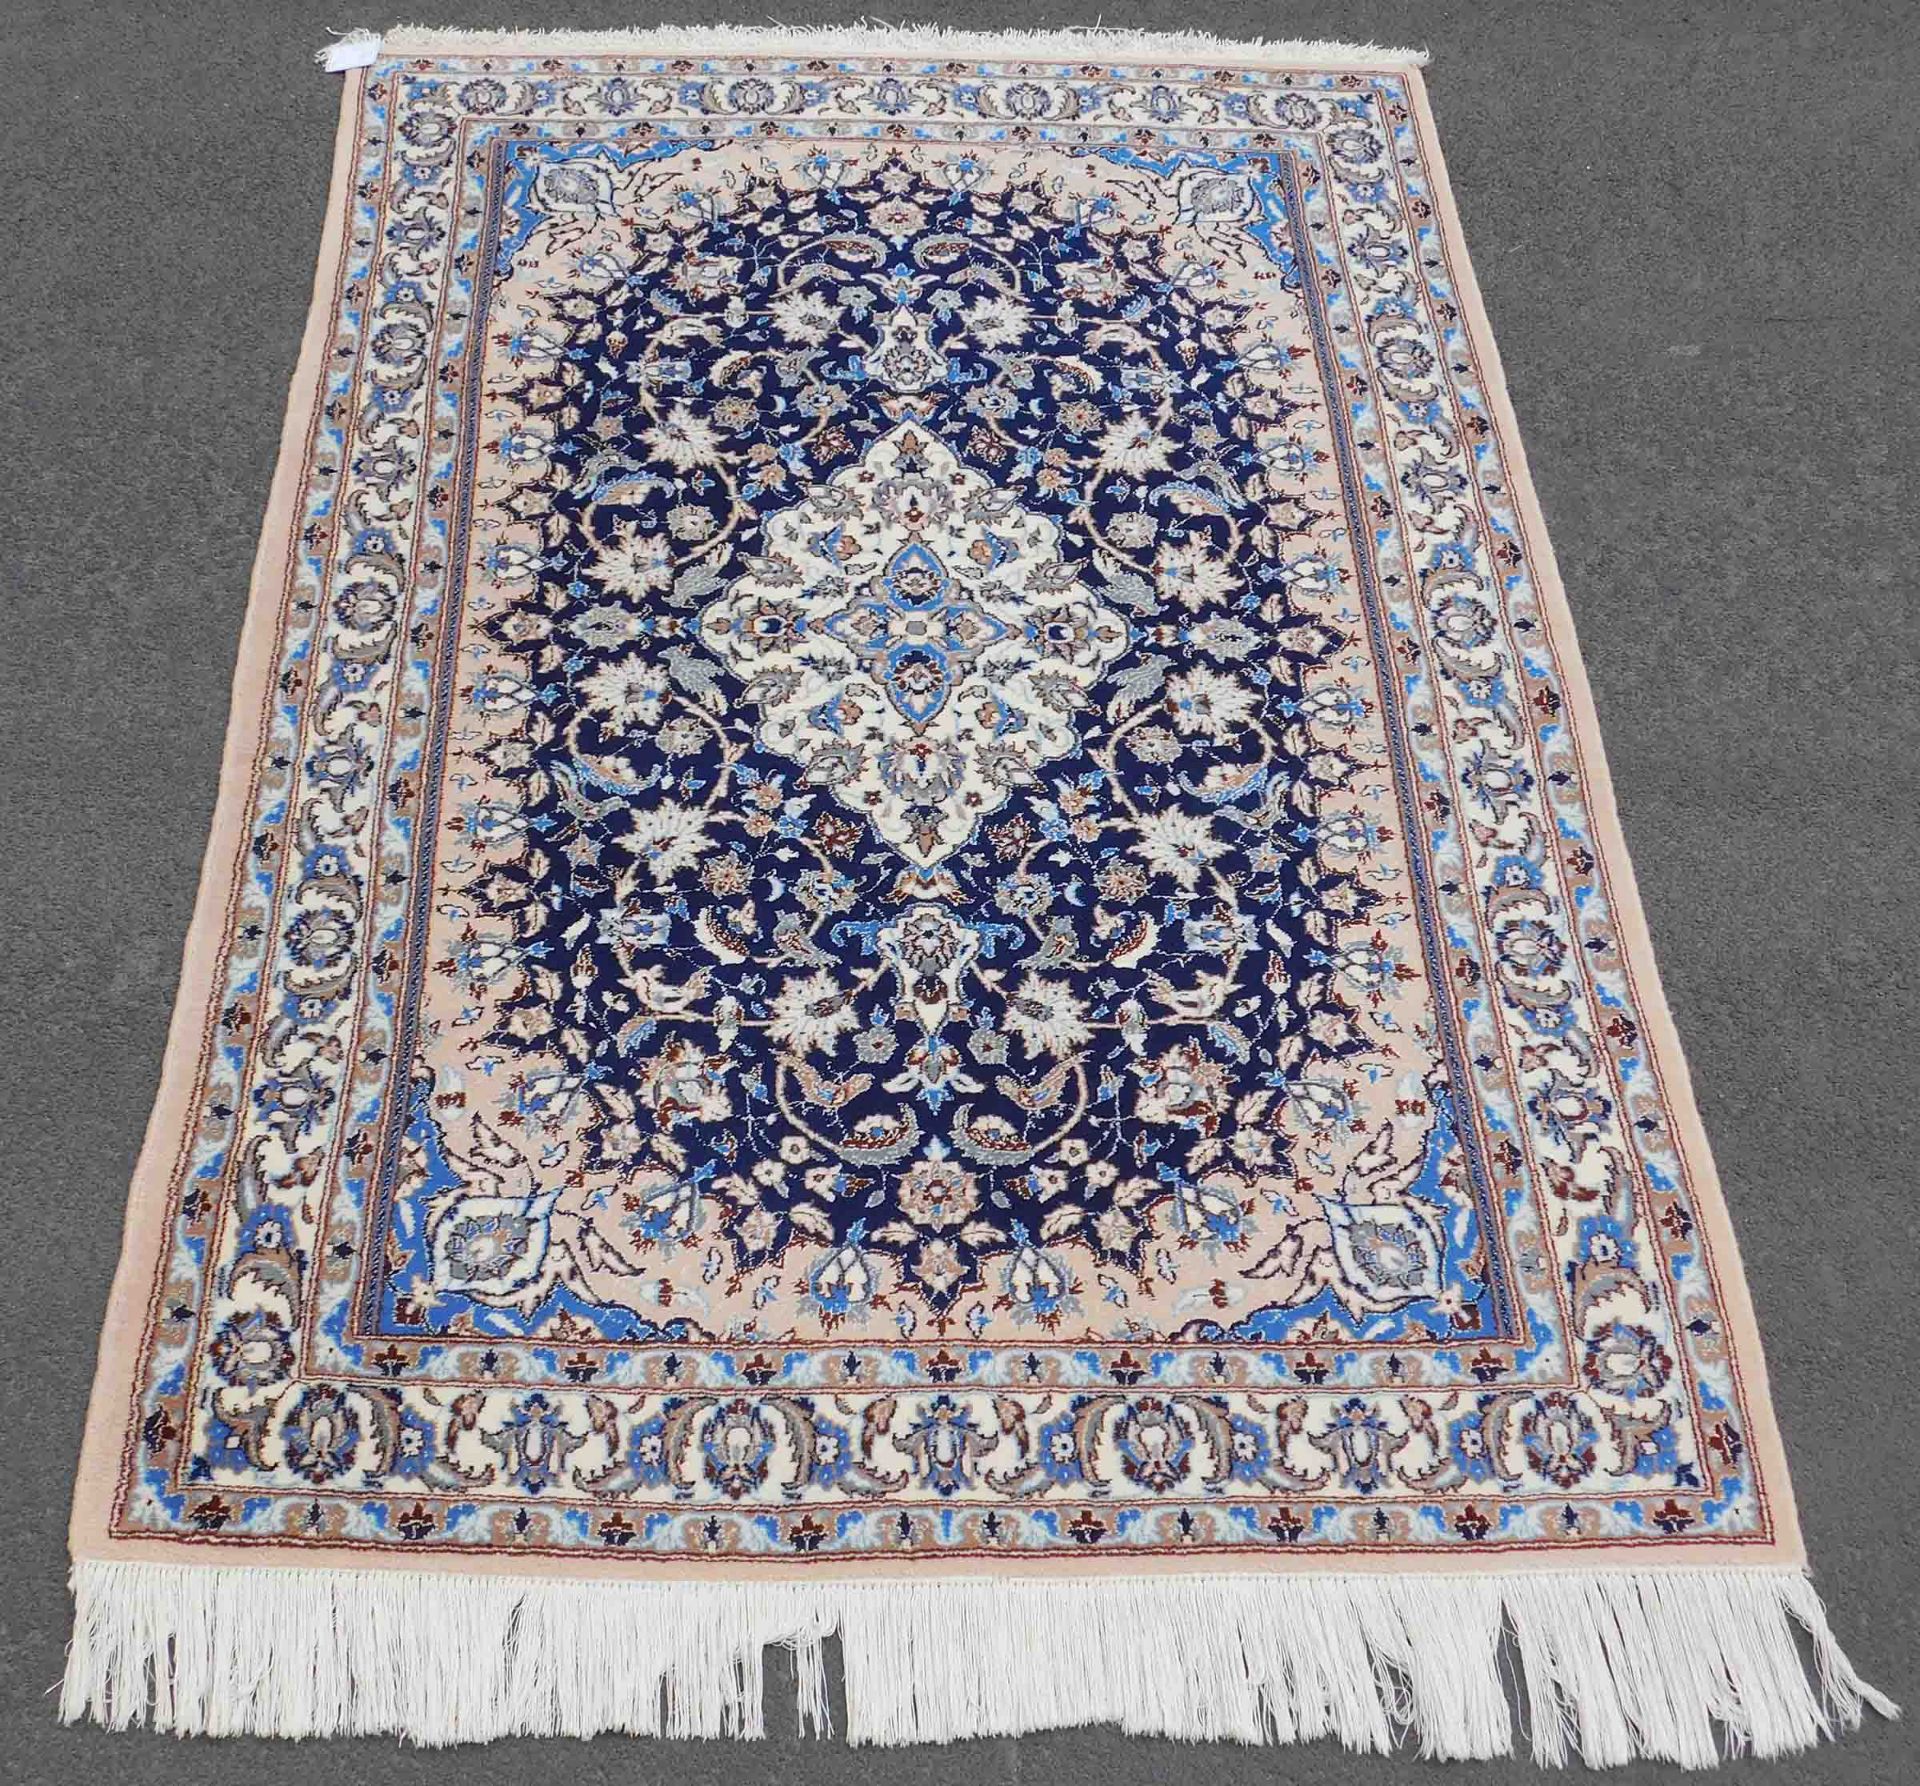 Nain Persian rug. Iran. Very fine weave. Medallion carpet.193 cm x 124 cm. Knotted by hand. Wool and